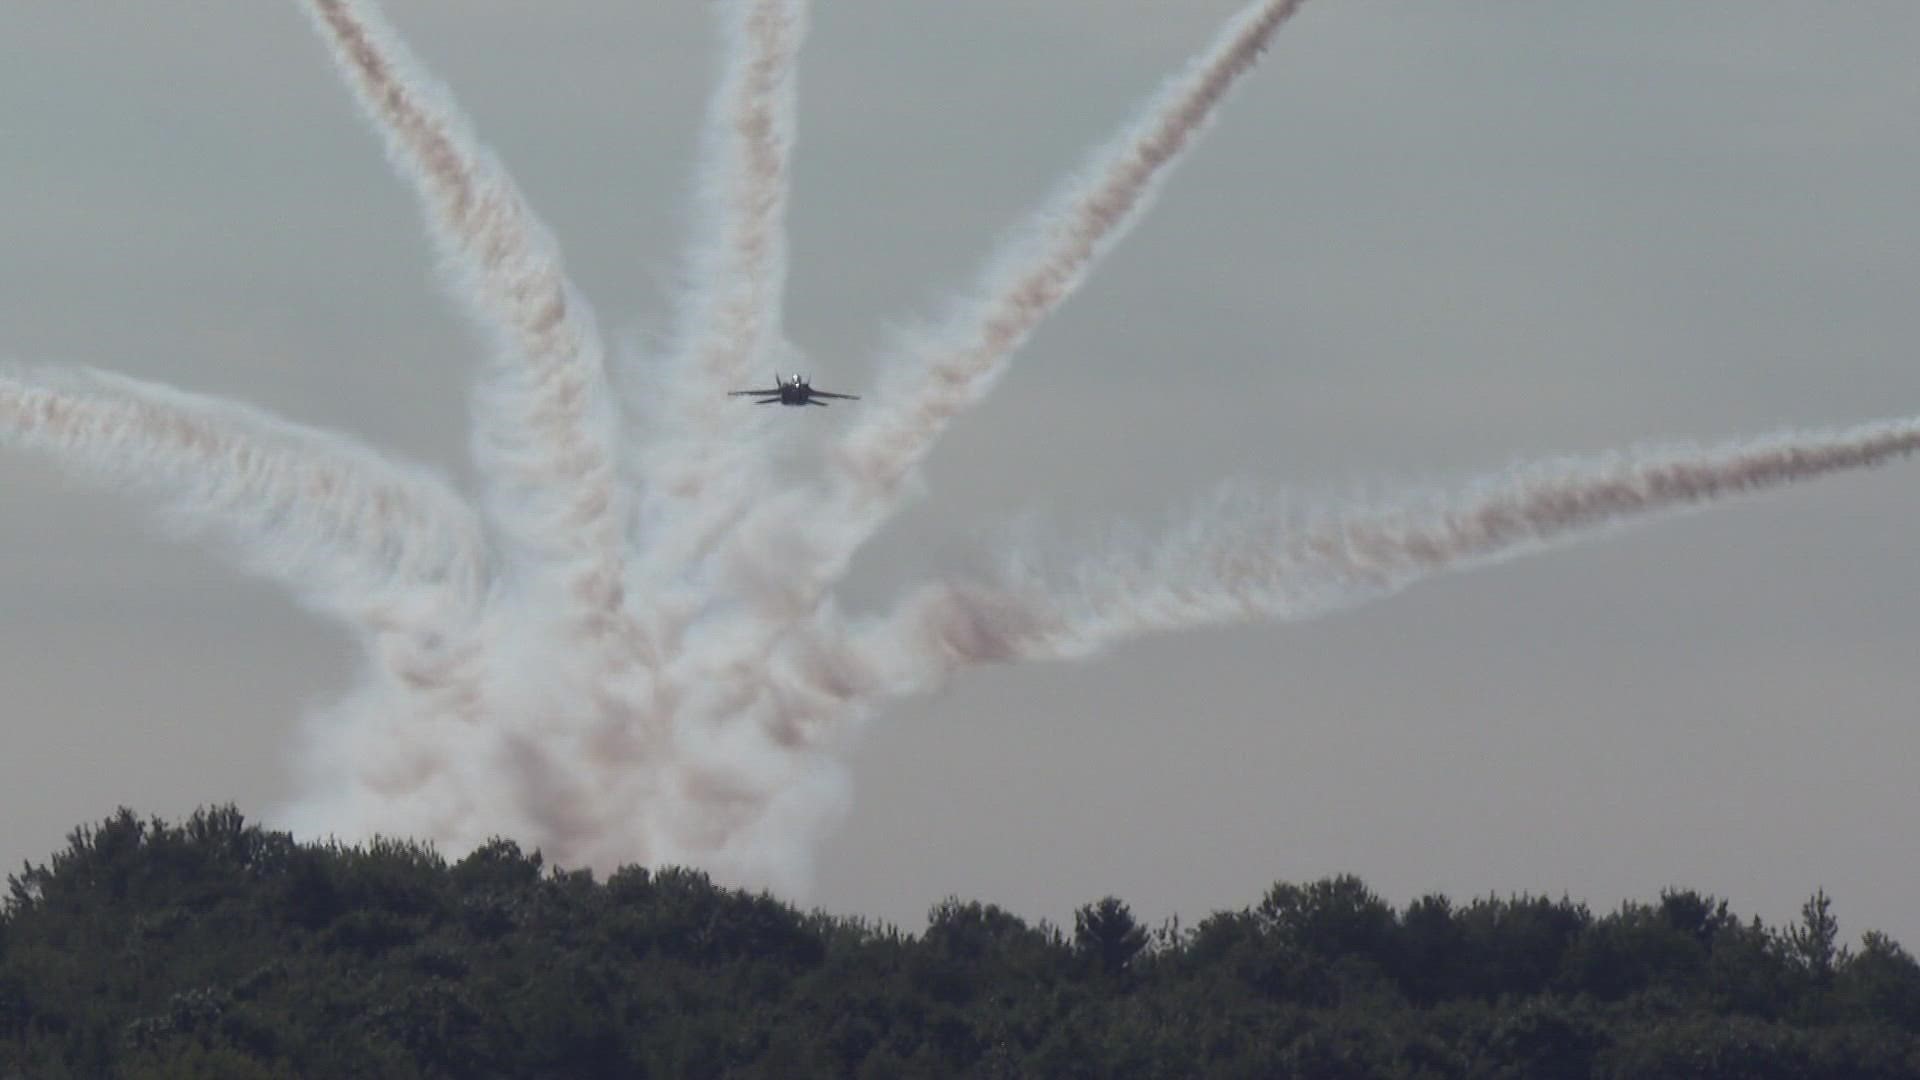 'The Great State of Maine Air Show' returned to the Brunswick Executive Airport for the first time since 2017 with a headline performance by the Blue Angels.